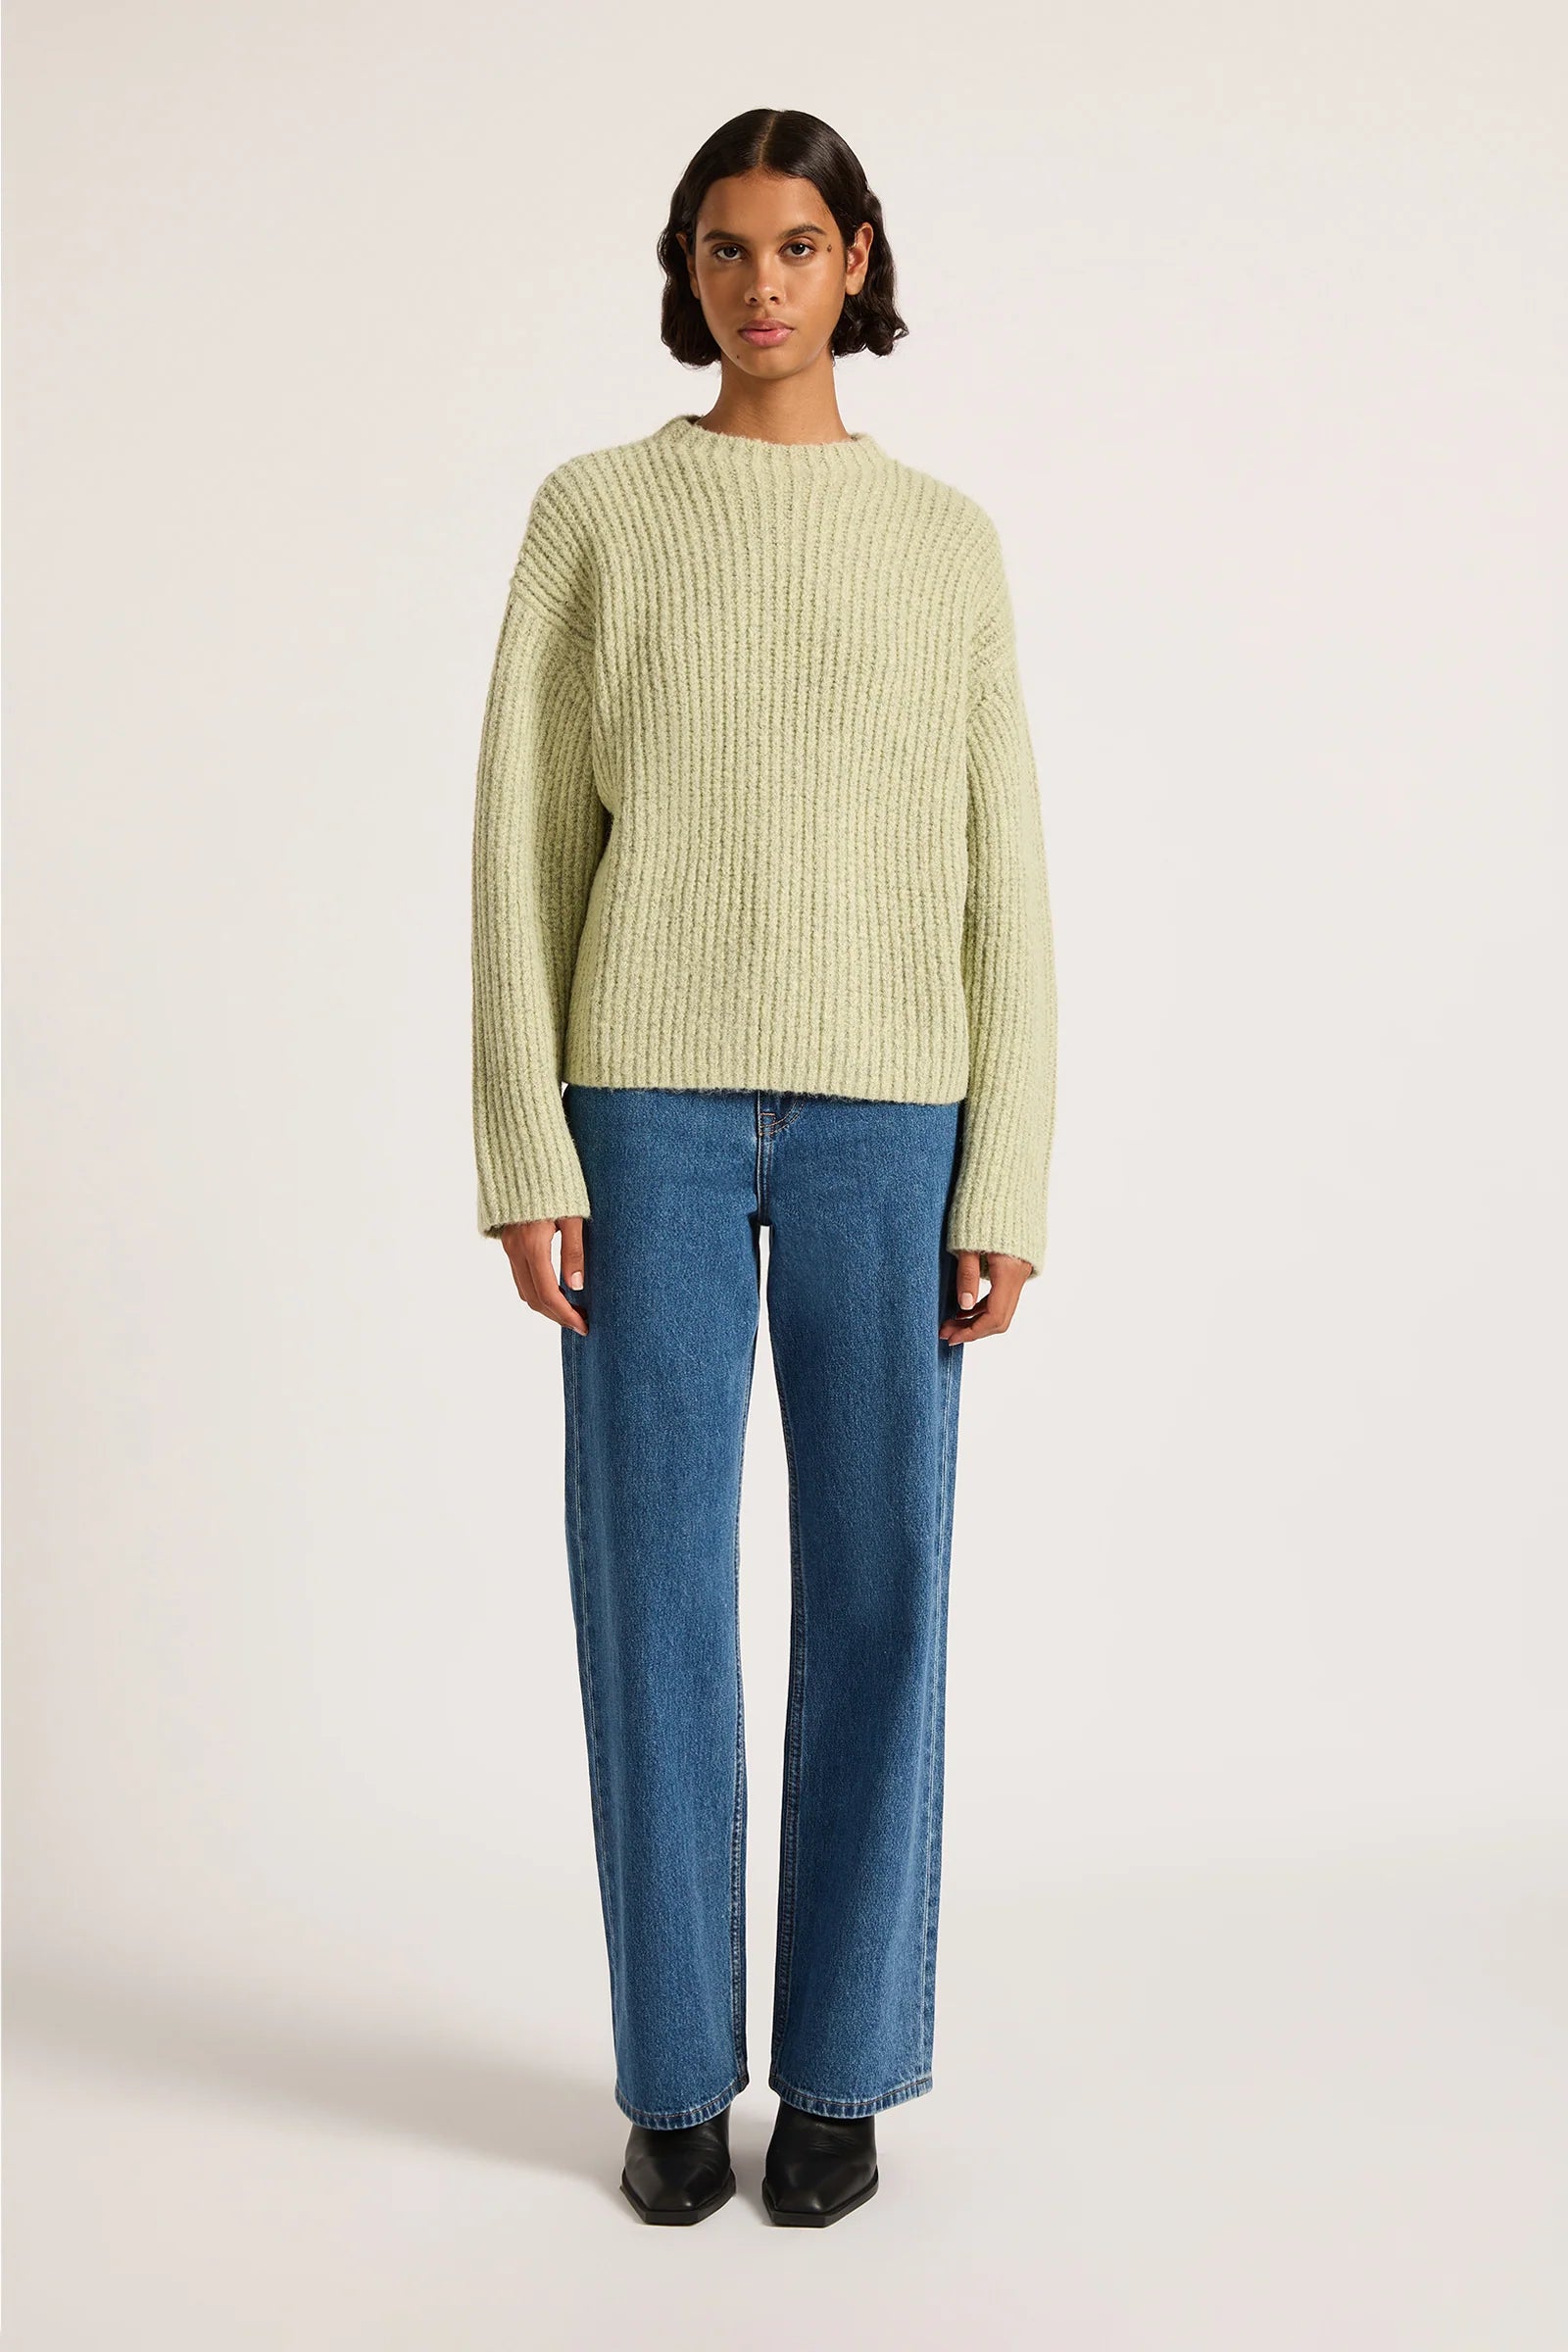 NUDE LUCY Parker knit - Grass